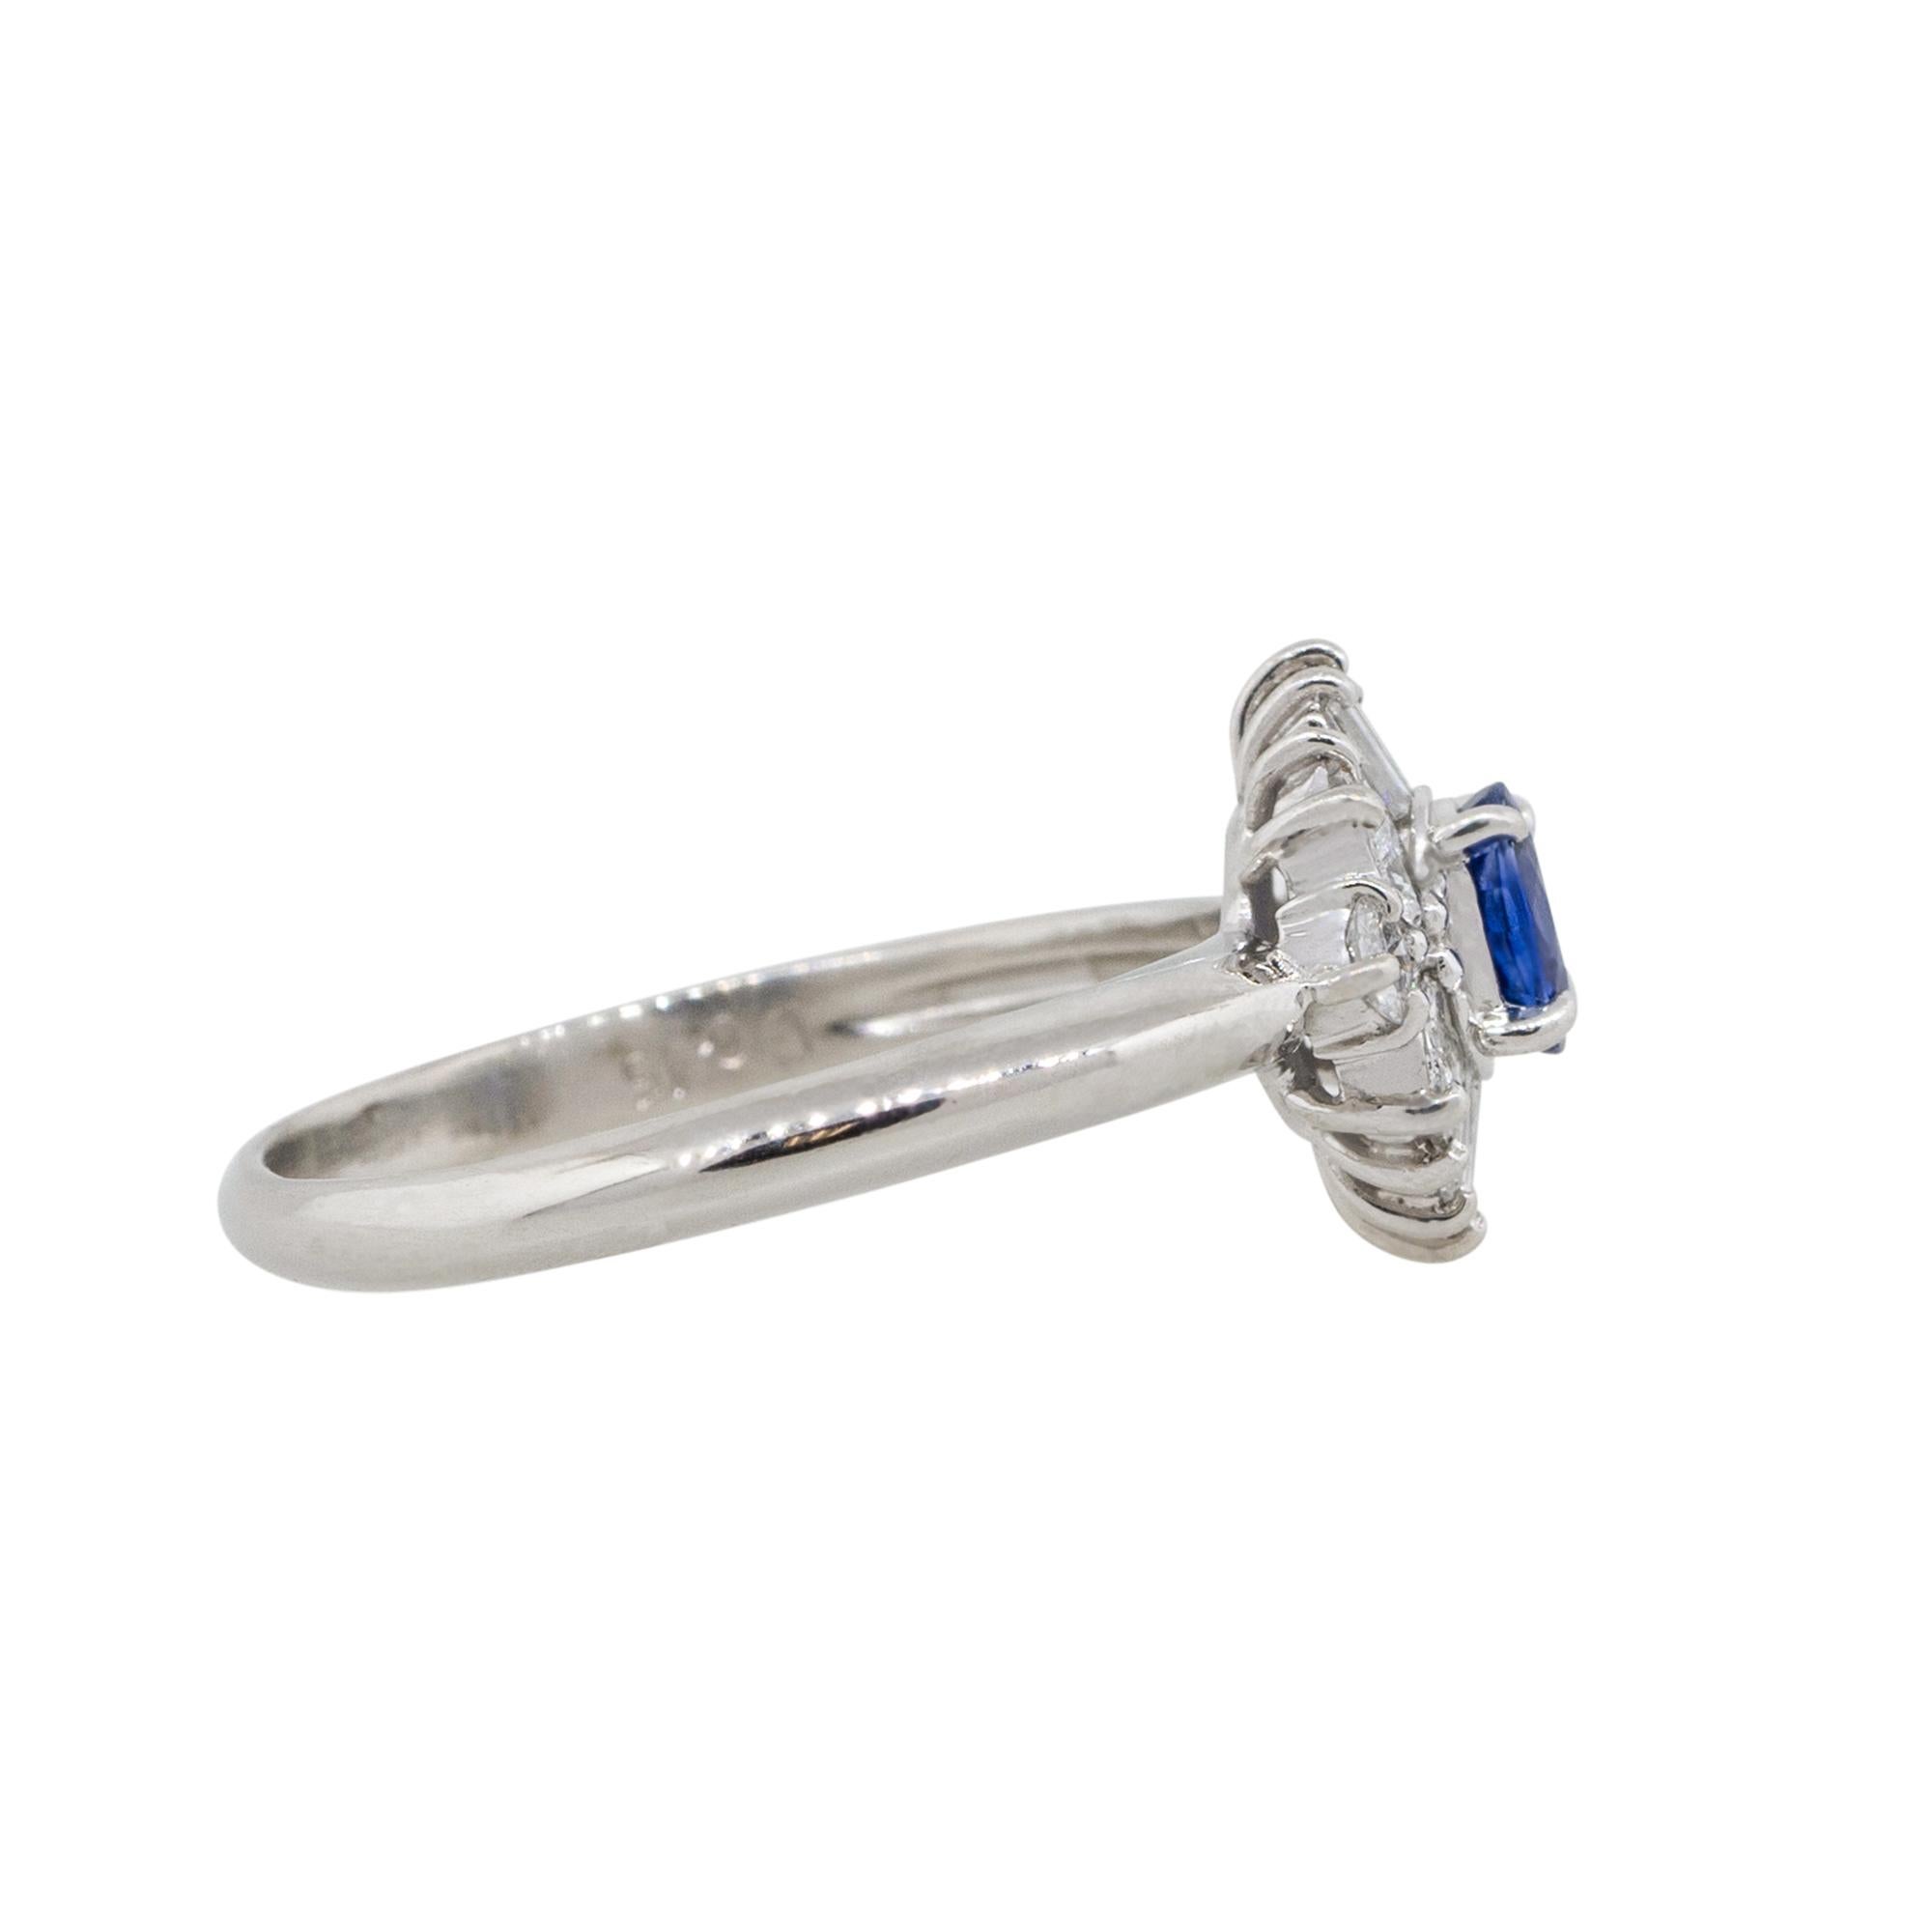 0.52 Carat Oval Cut Sapphire Center Diamond Cocktail Ring Platinum in Stock In New Condition For Sale In Boca Raton, FL